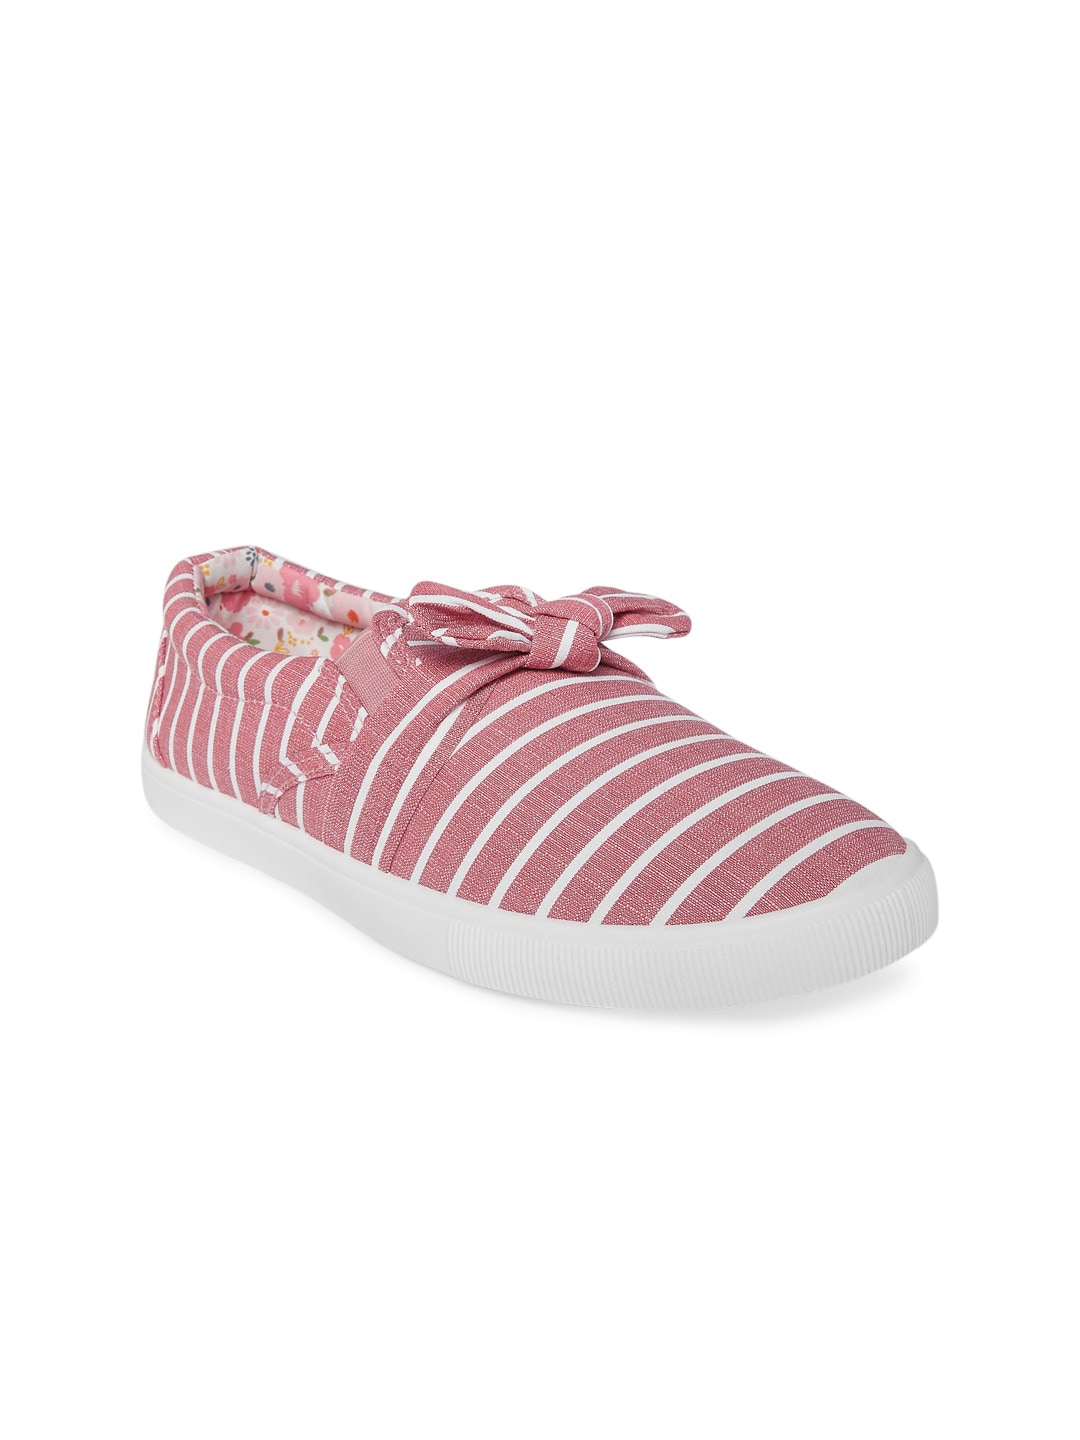 Forever Glam by Pantaloons Women Pink & White Striped Slip-On Sneakers Price in India